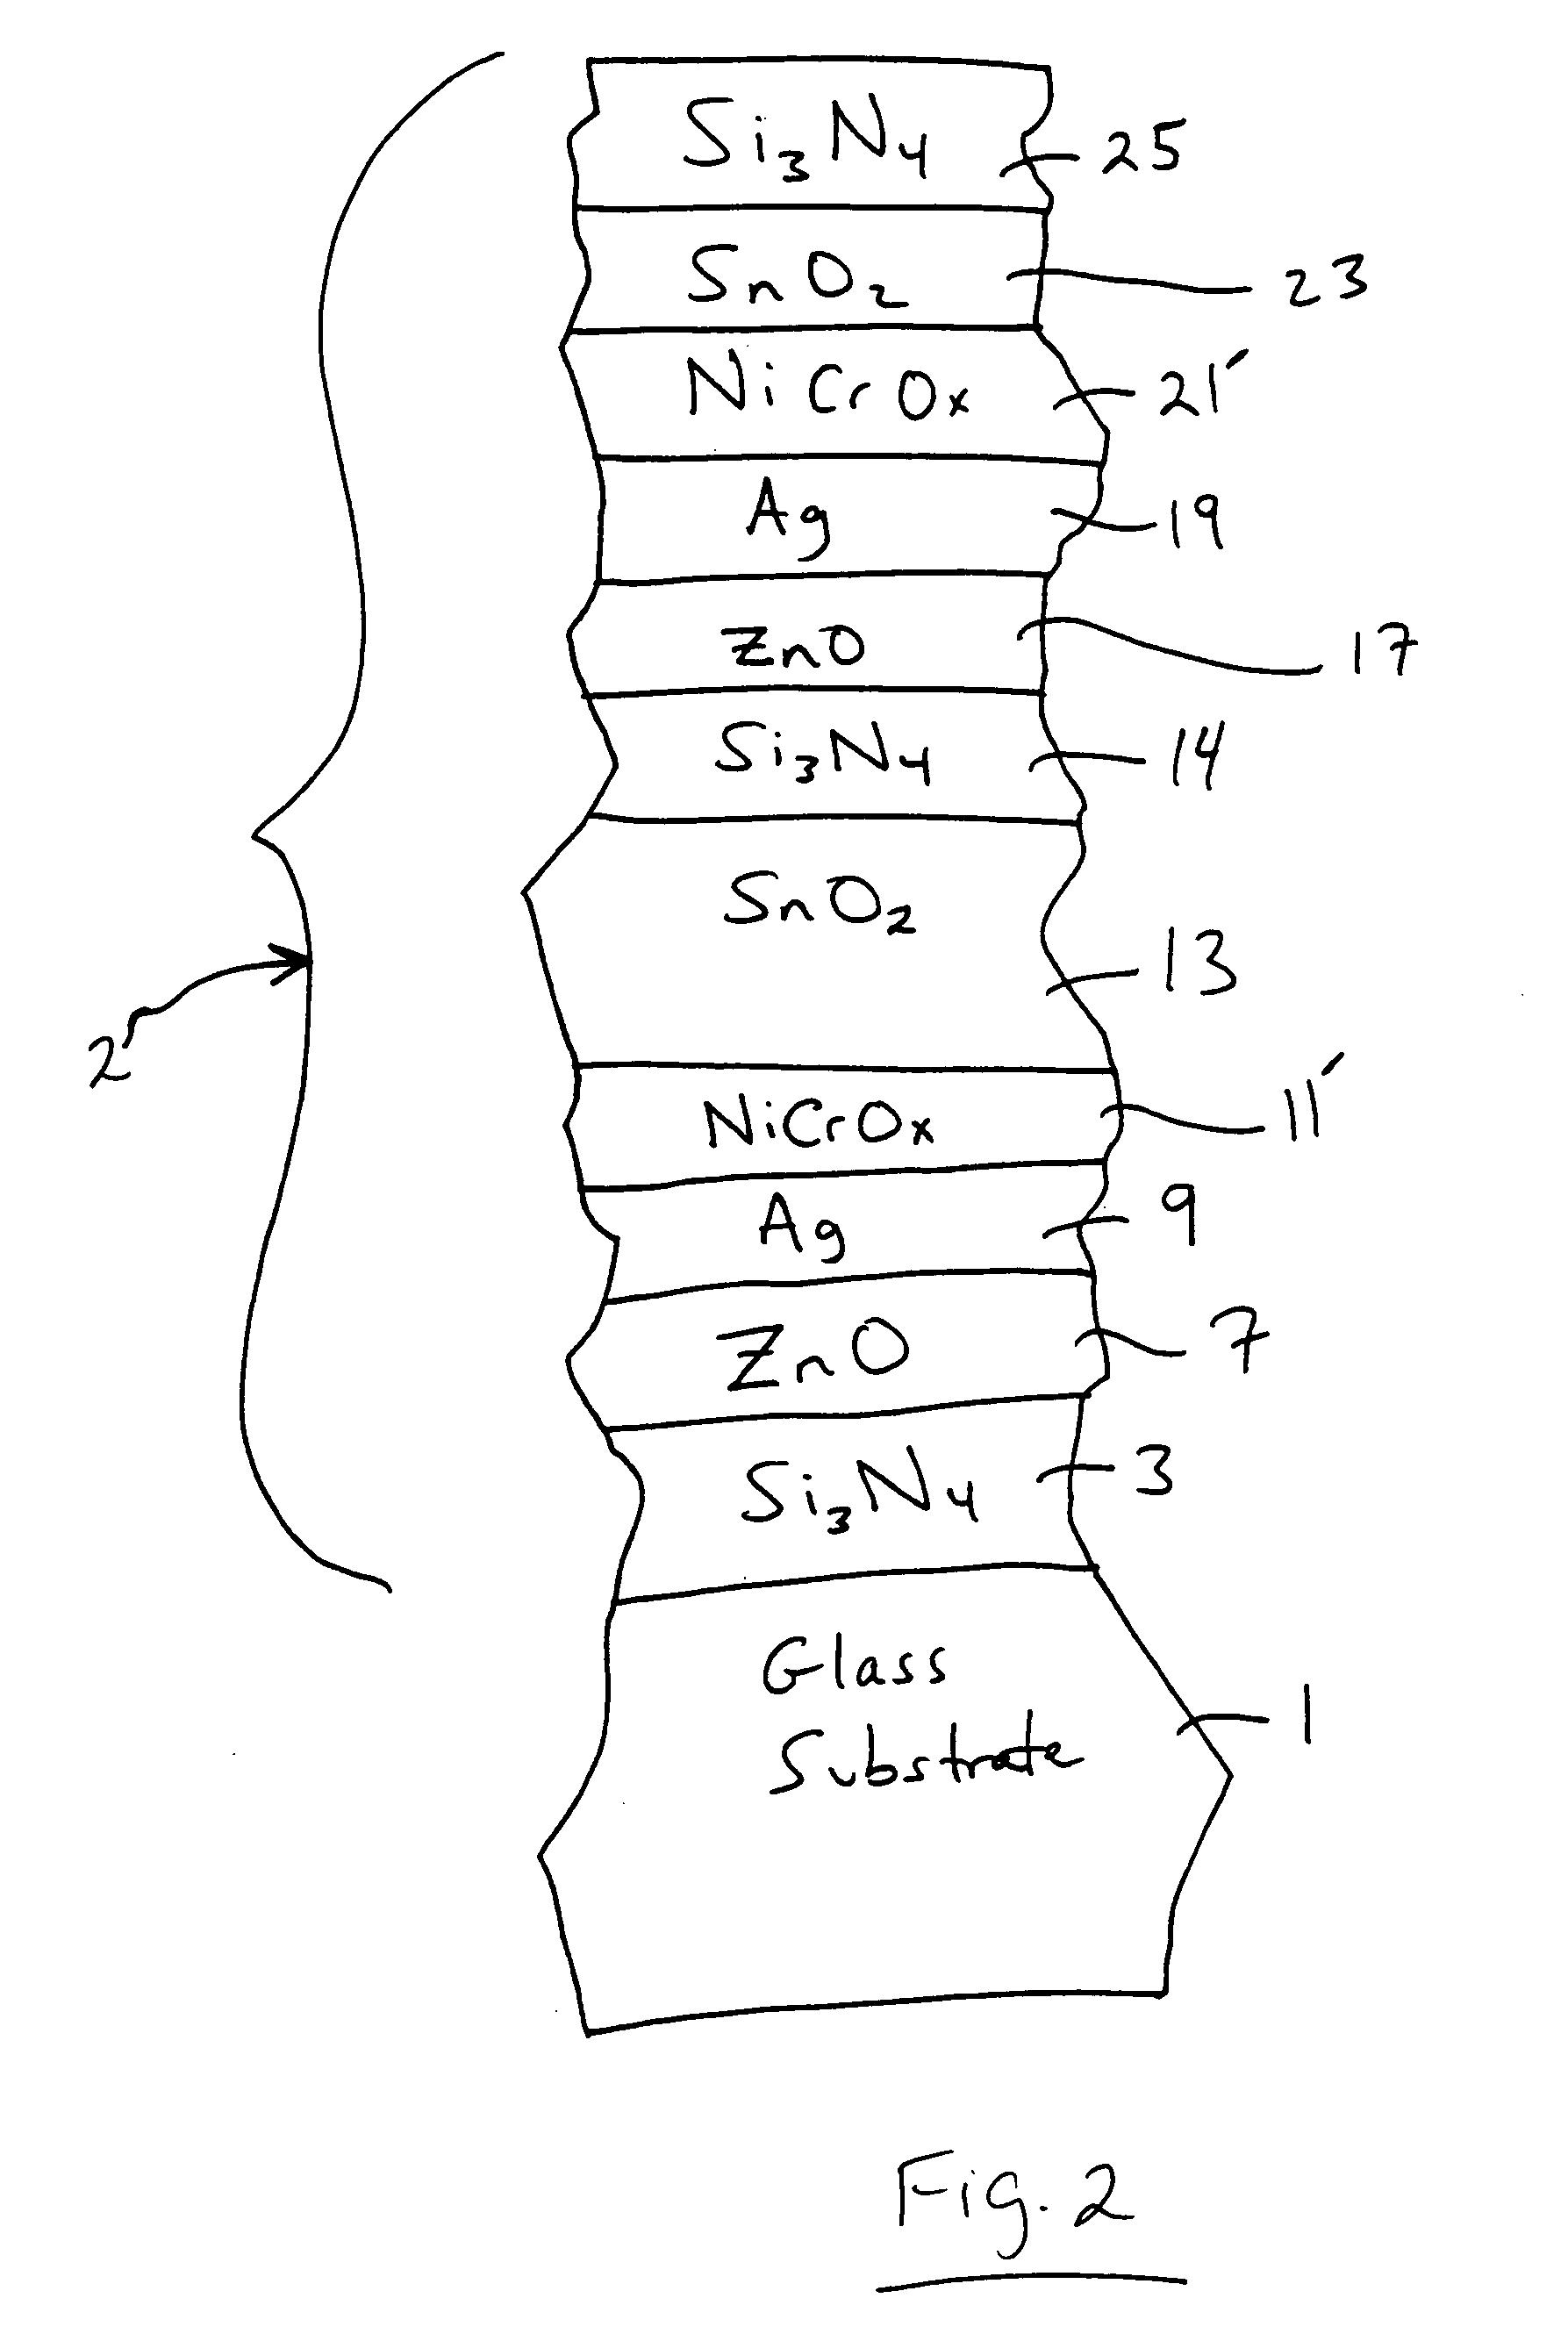 Coated article with oxidation graded layer proximate IR reflecting layer(s) and corresponding method